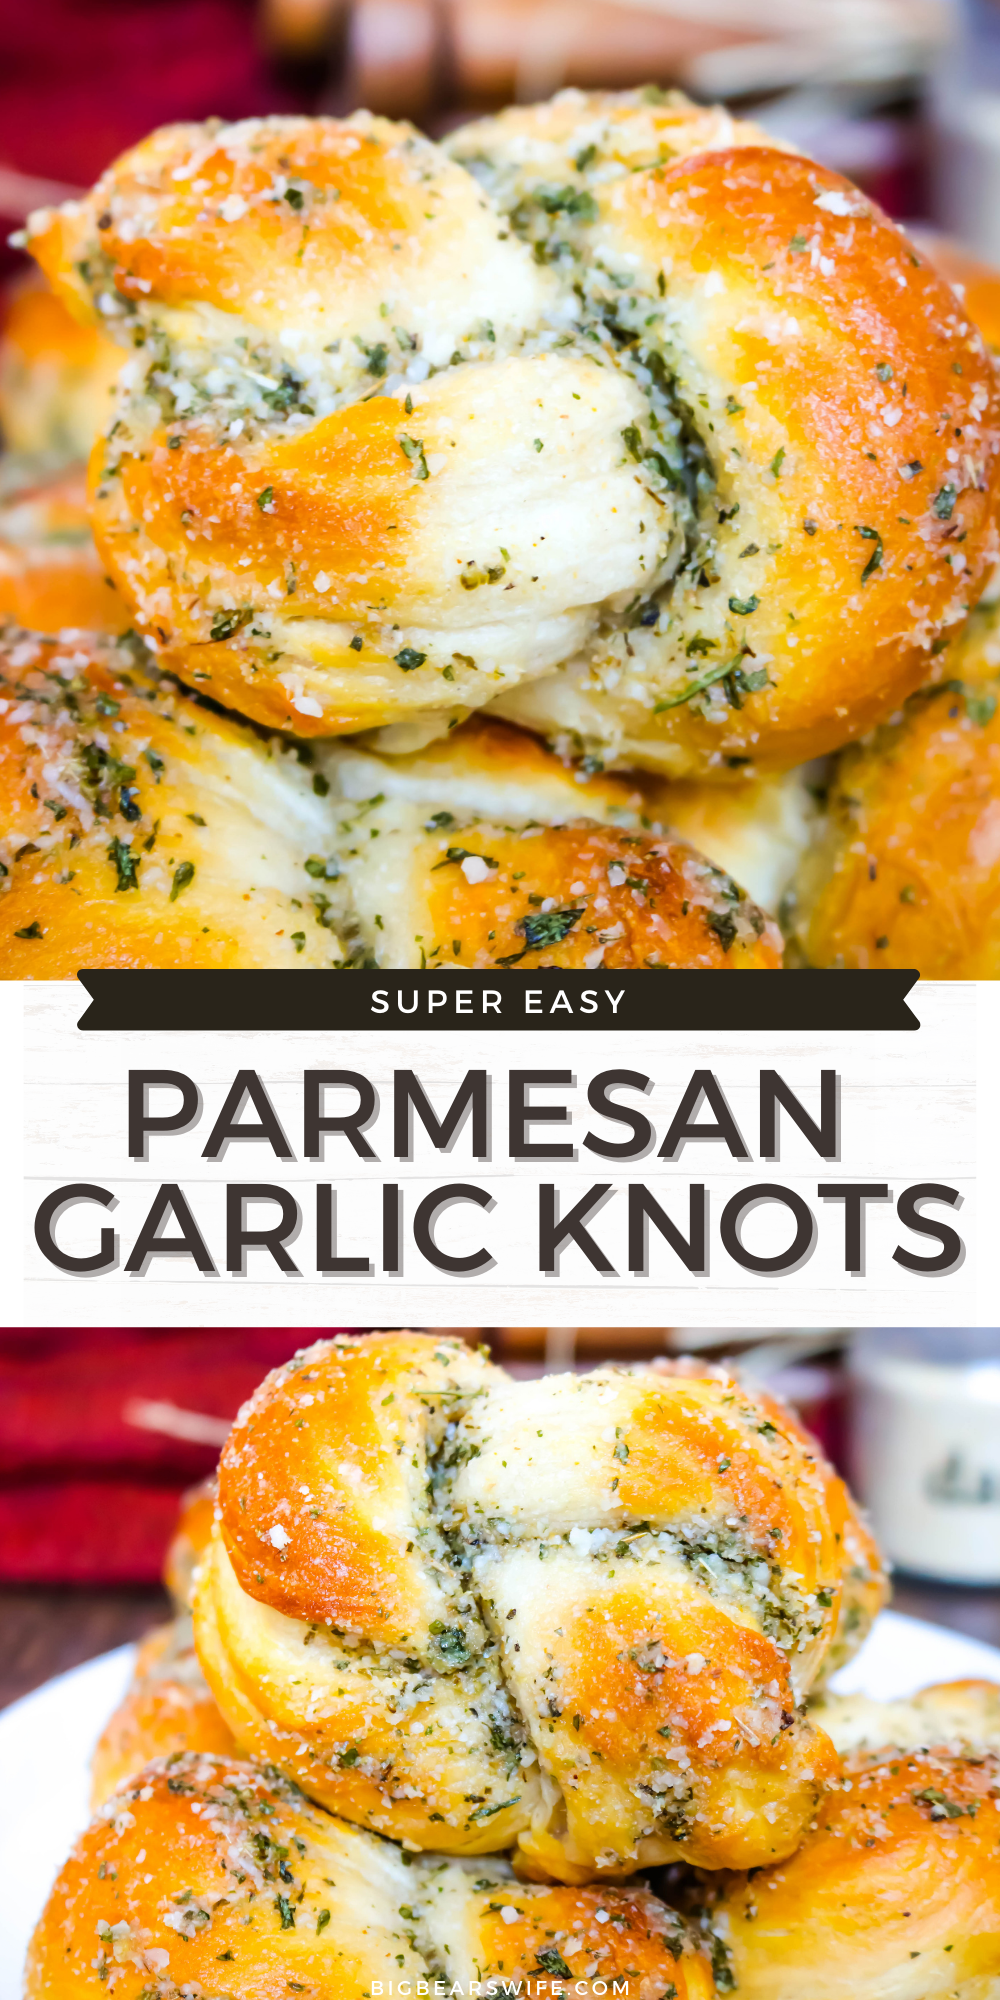 These super easy Parmesan Garlic Knots are perfect for Spaghetti night and great with a pot roast! They're made with refrigerated biscuits and you're going to love them!   via @bigbearswife